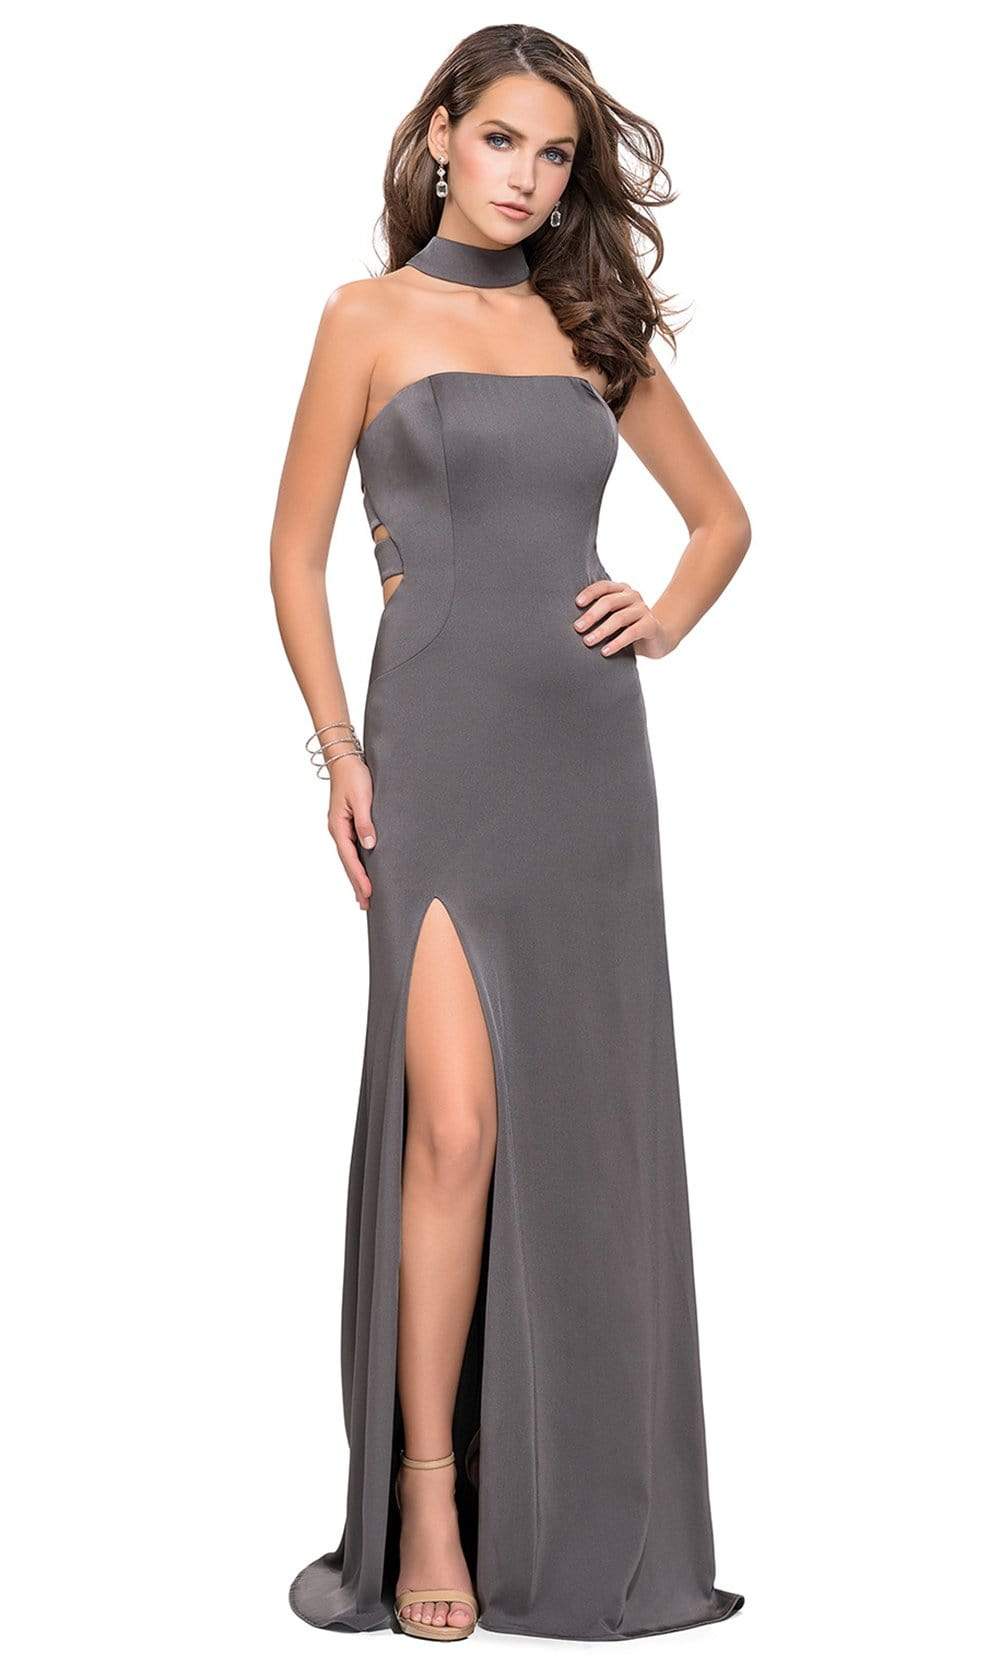 La Femme - Choker Style Fitted High Slit Dress 25735SC - 2 pcs Charcoal In Size 6 and 8 Available CCSALE 6 / Charcoal